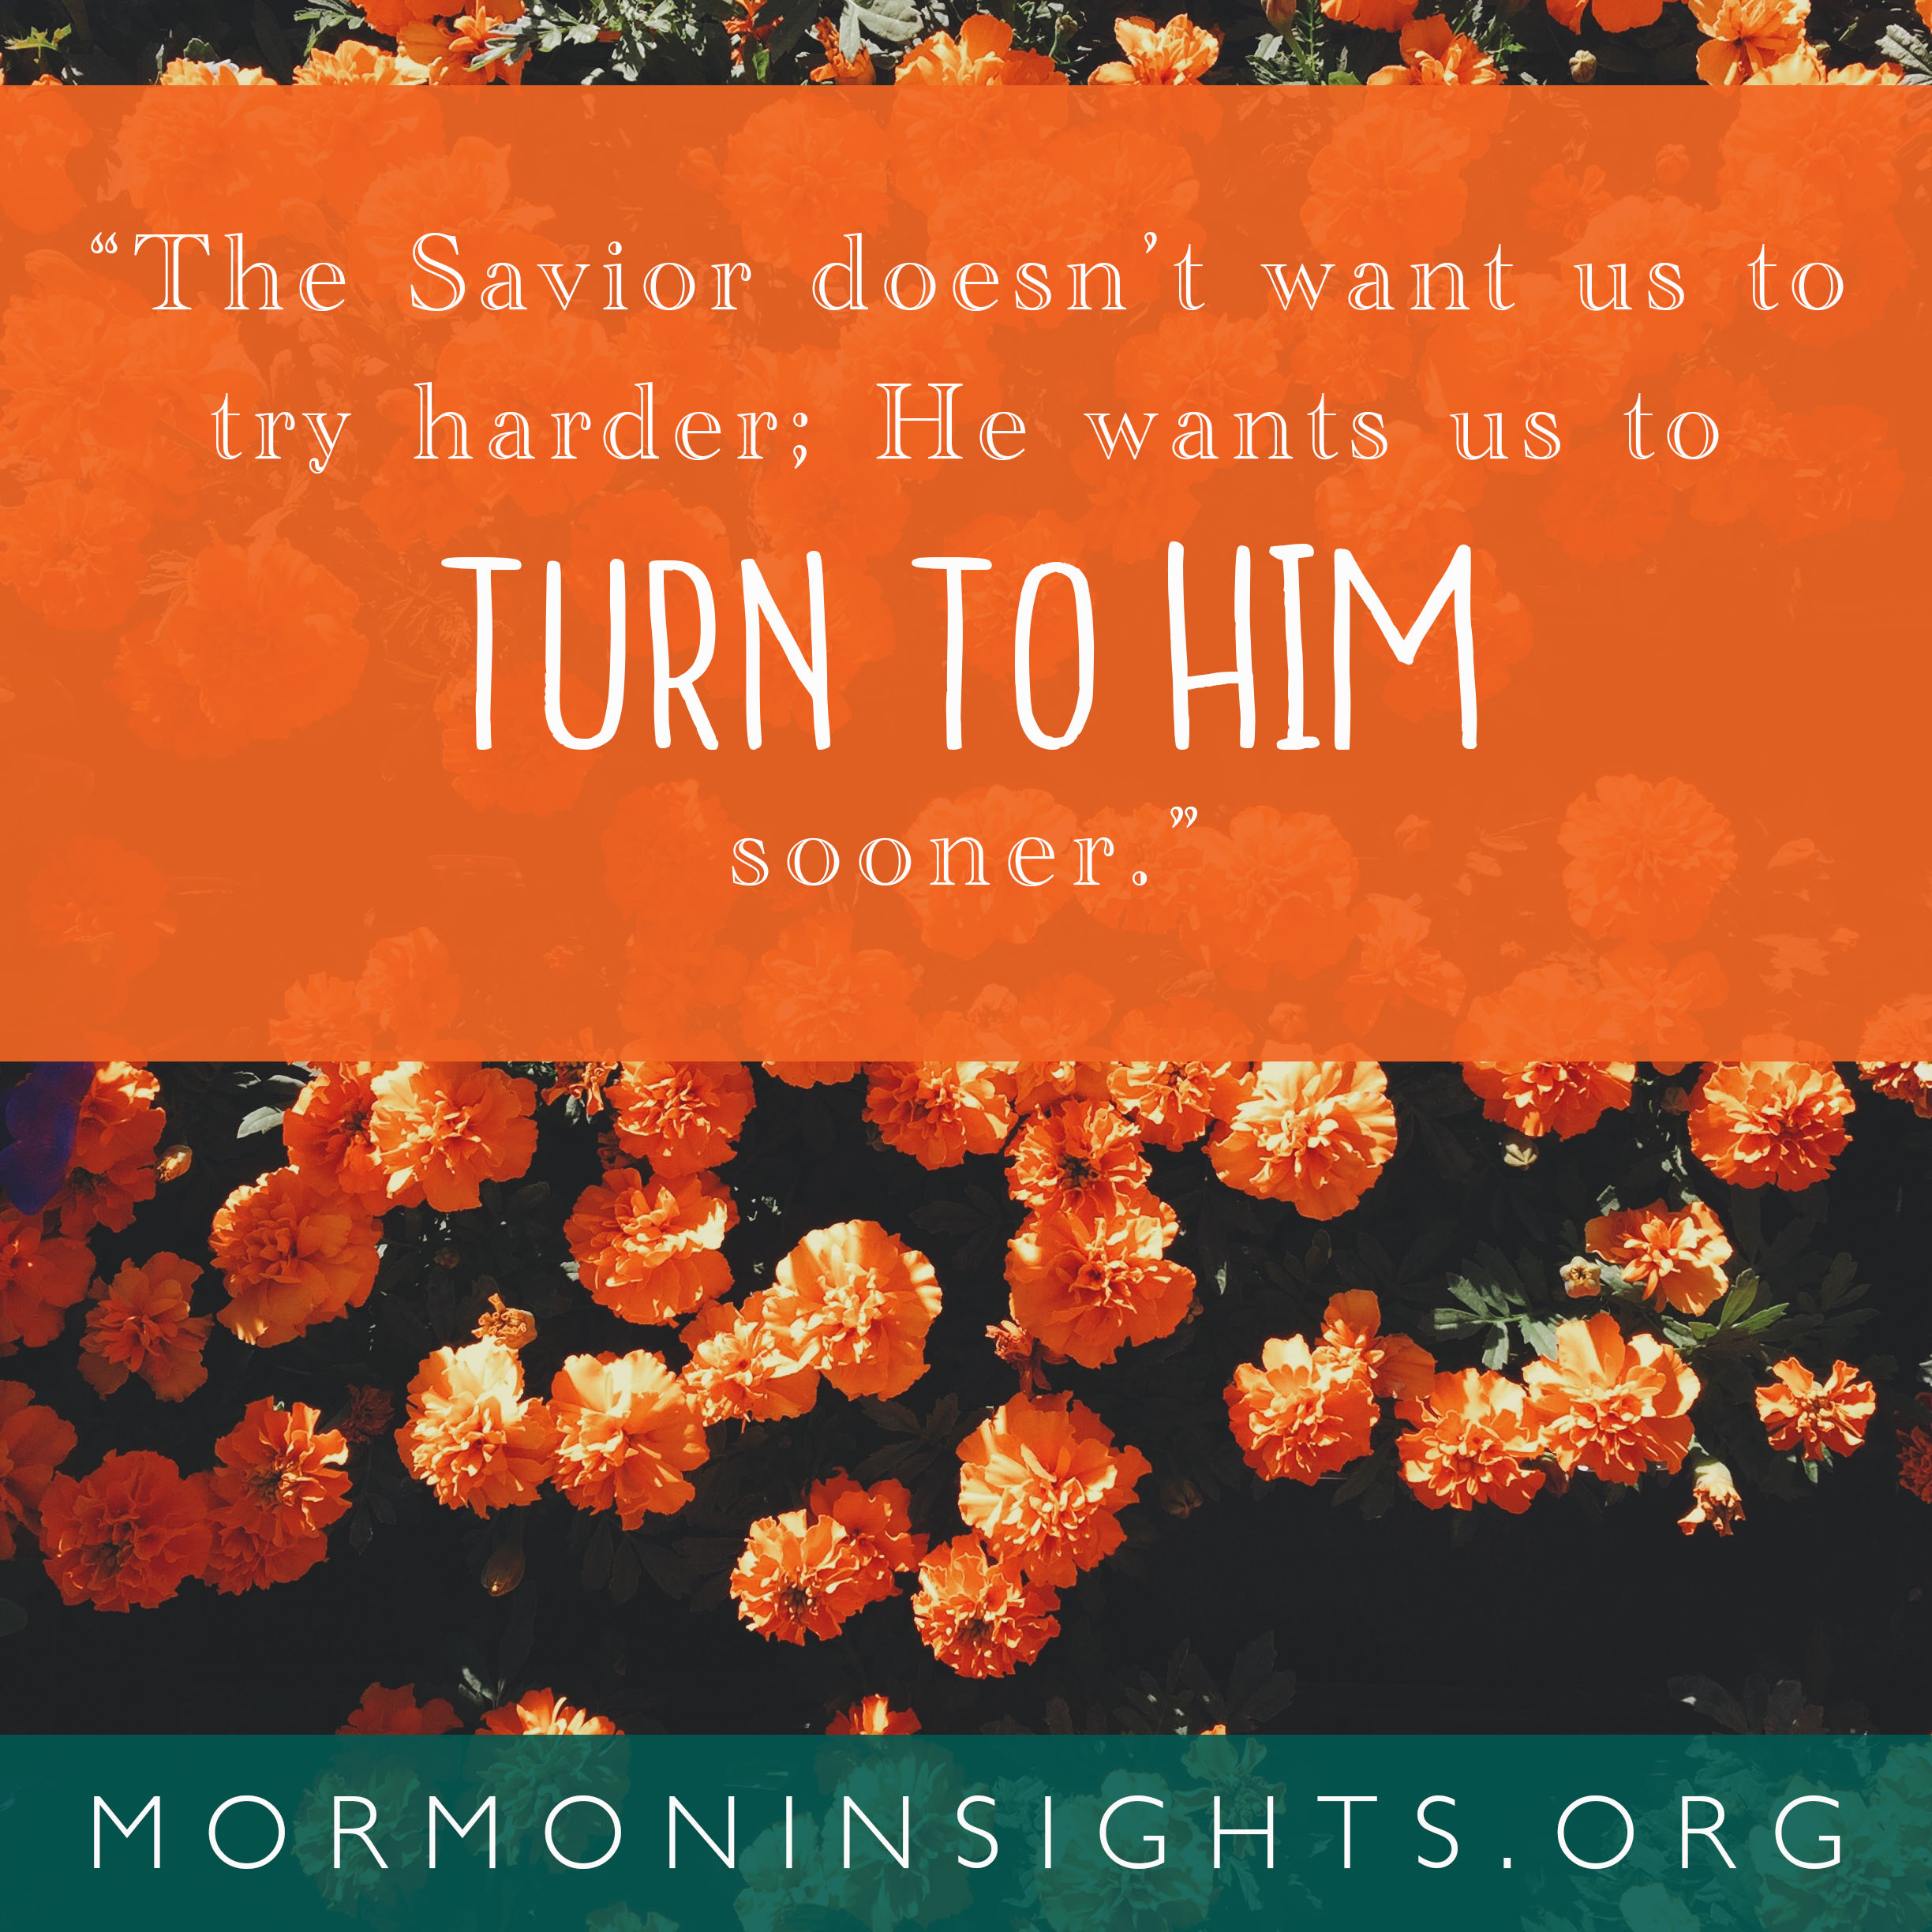 "The savior doesn't want us to try harder; He wants us to turn to Him sooner."